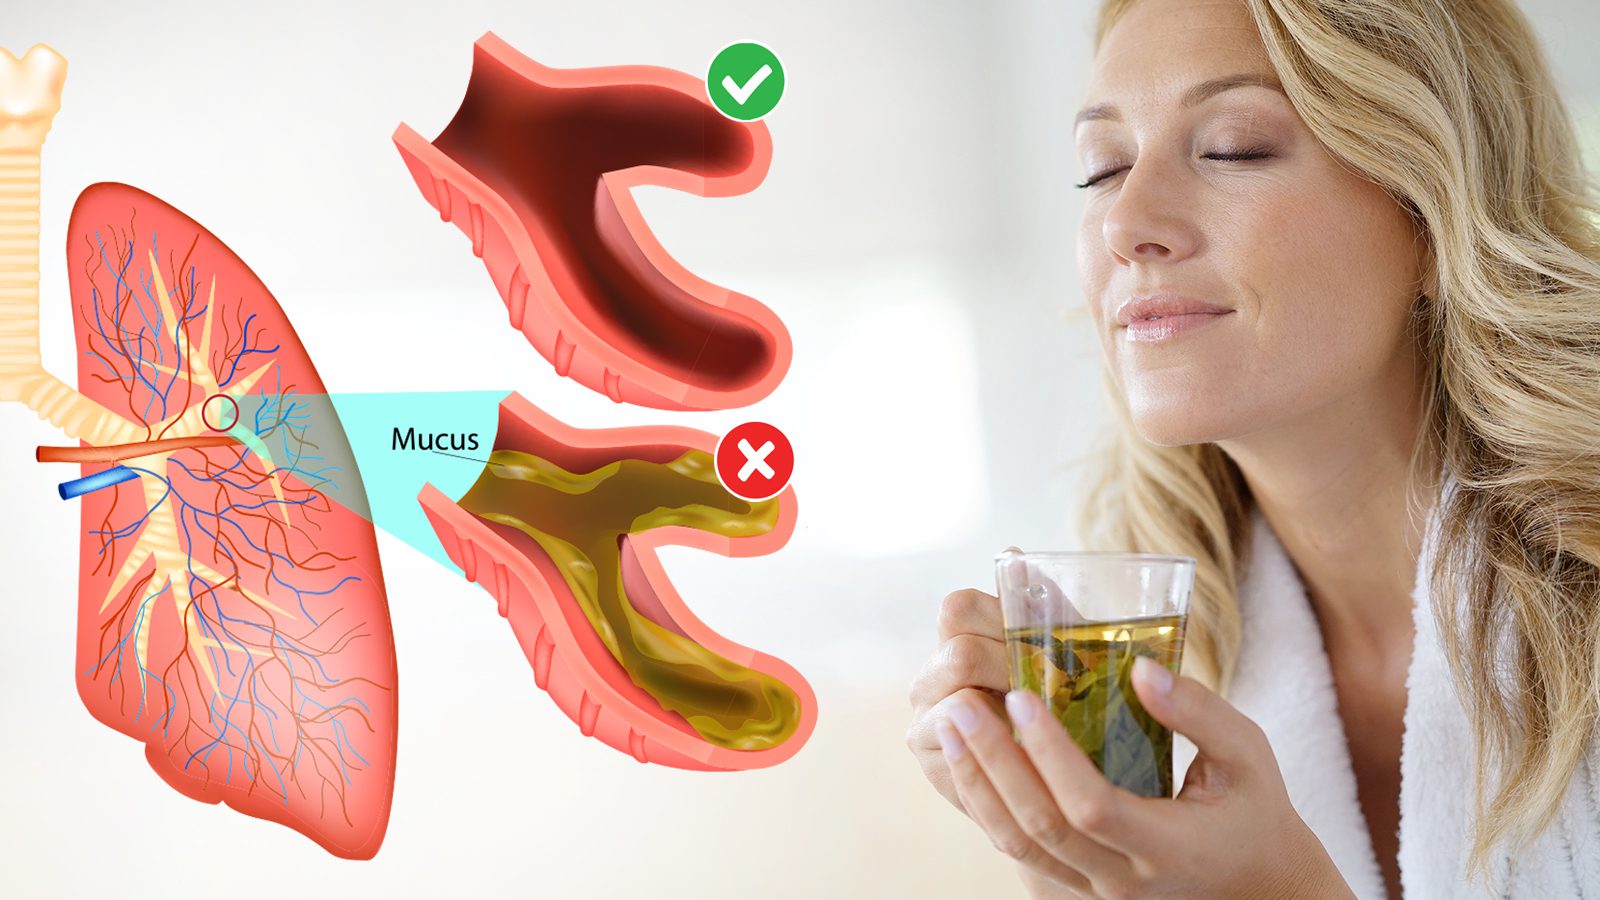 7 Ways to Flush Mucus From Your Body (Without Medication)